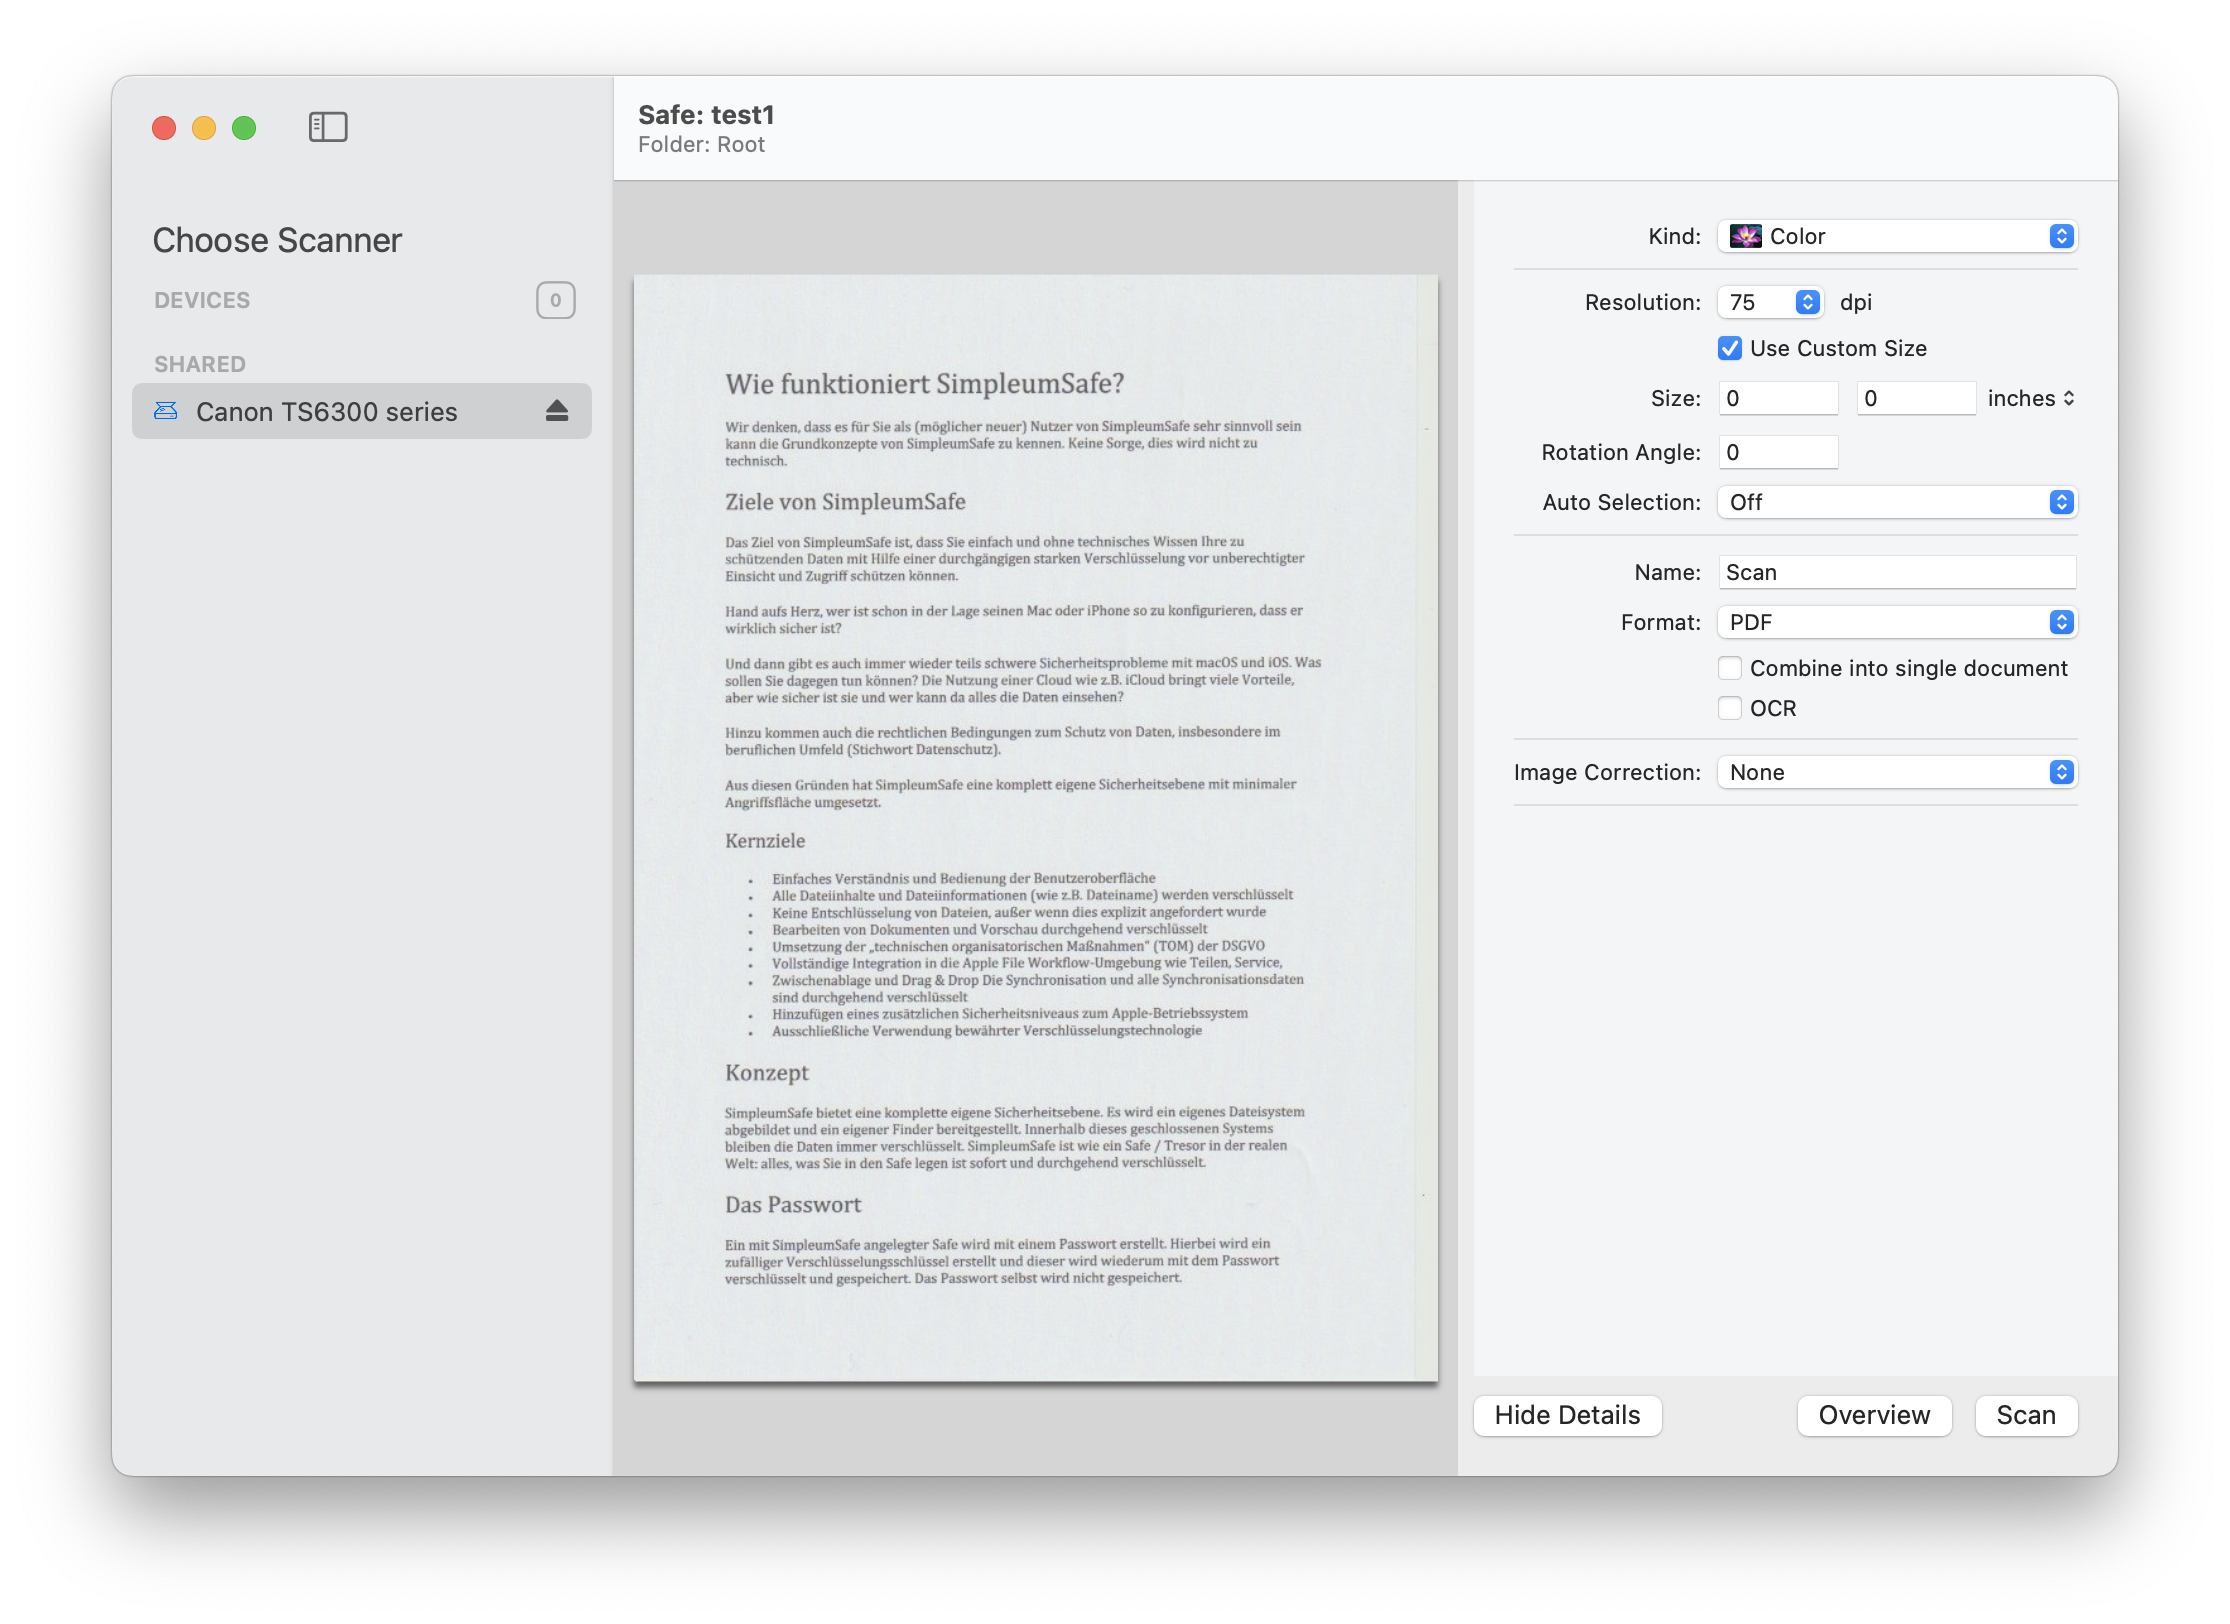 Scan documents directly from the Safe (Mac)